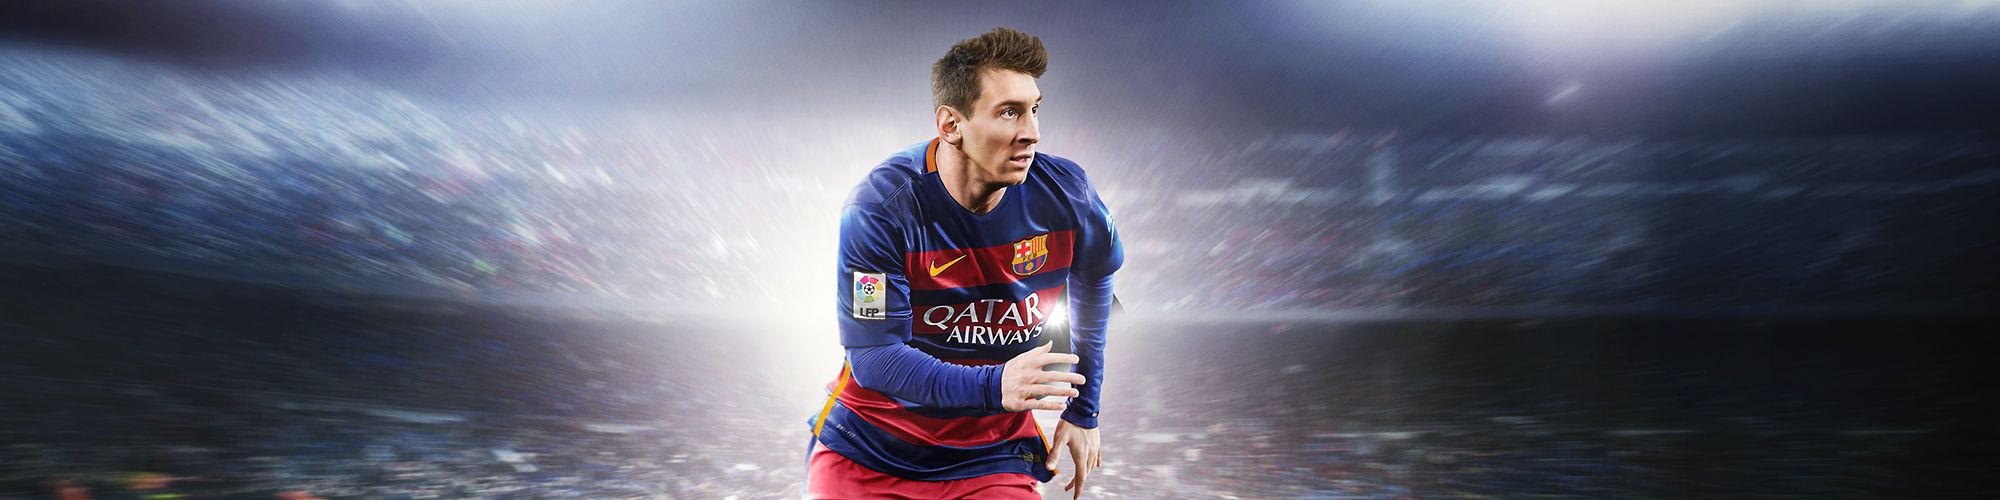 FIFA 16 technical specifications for computer